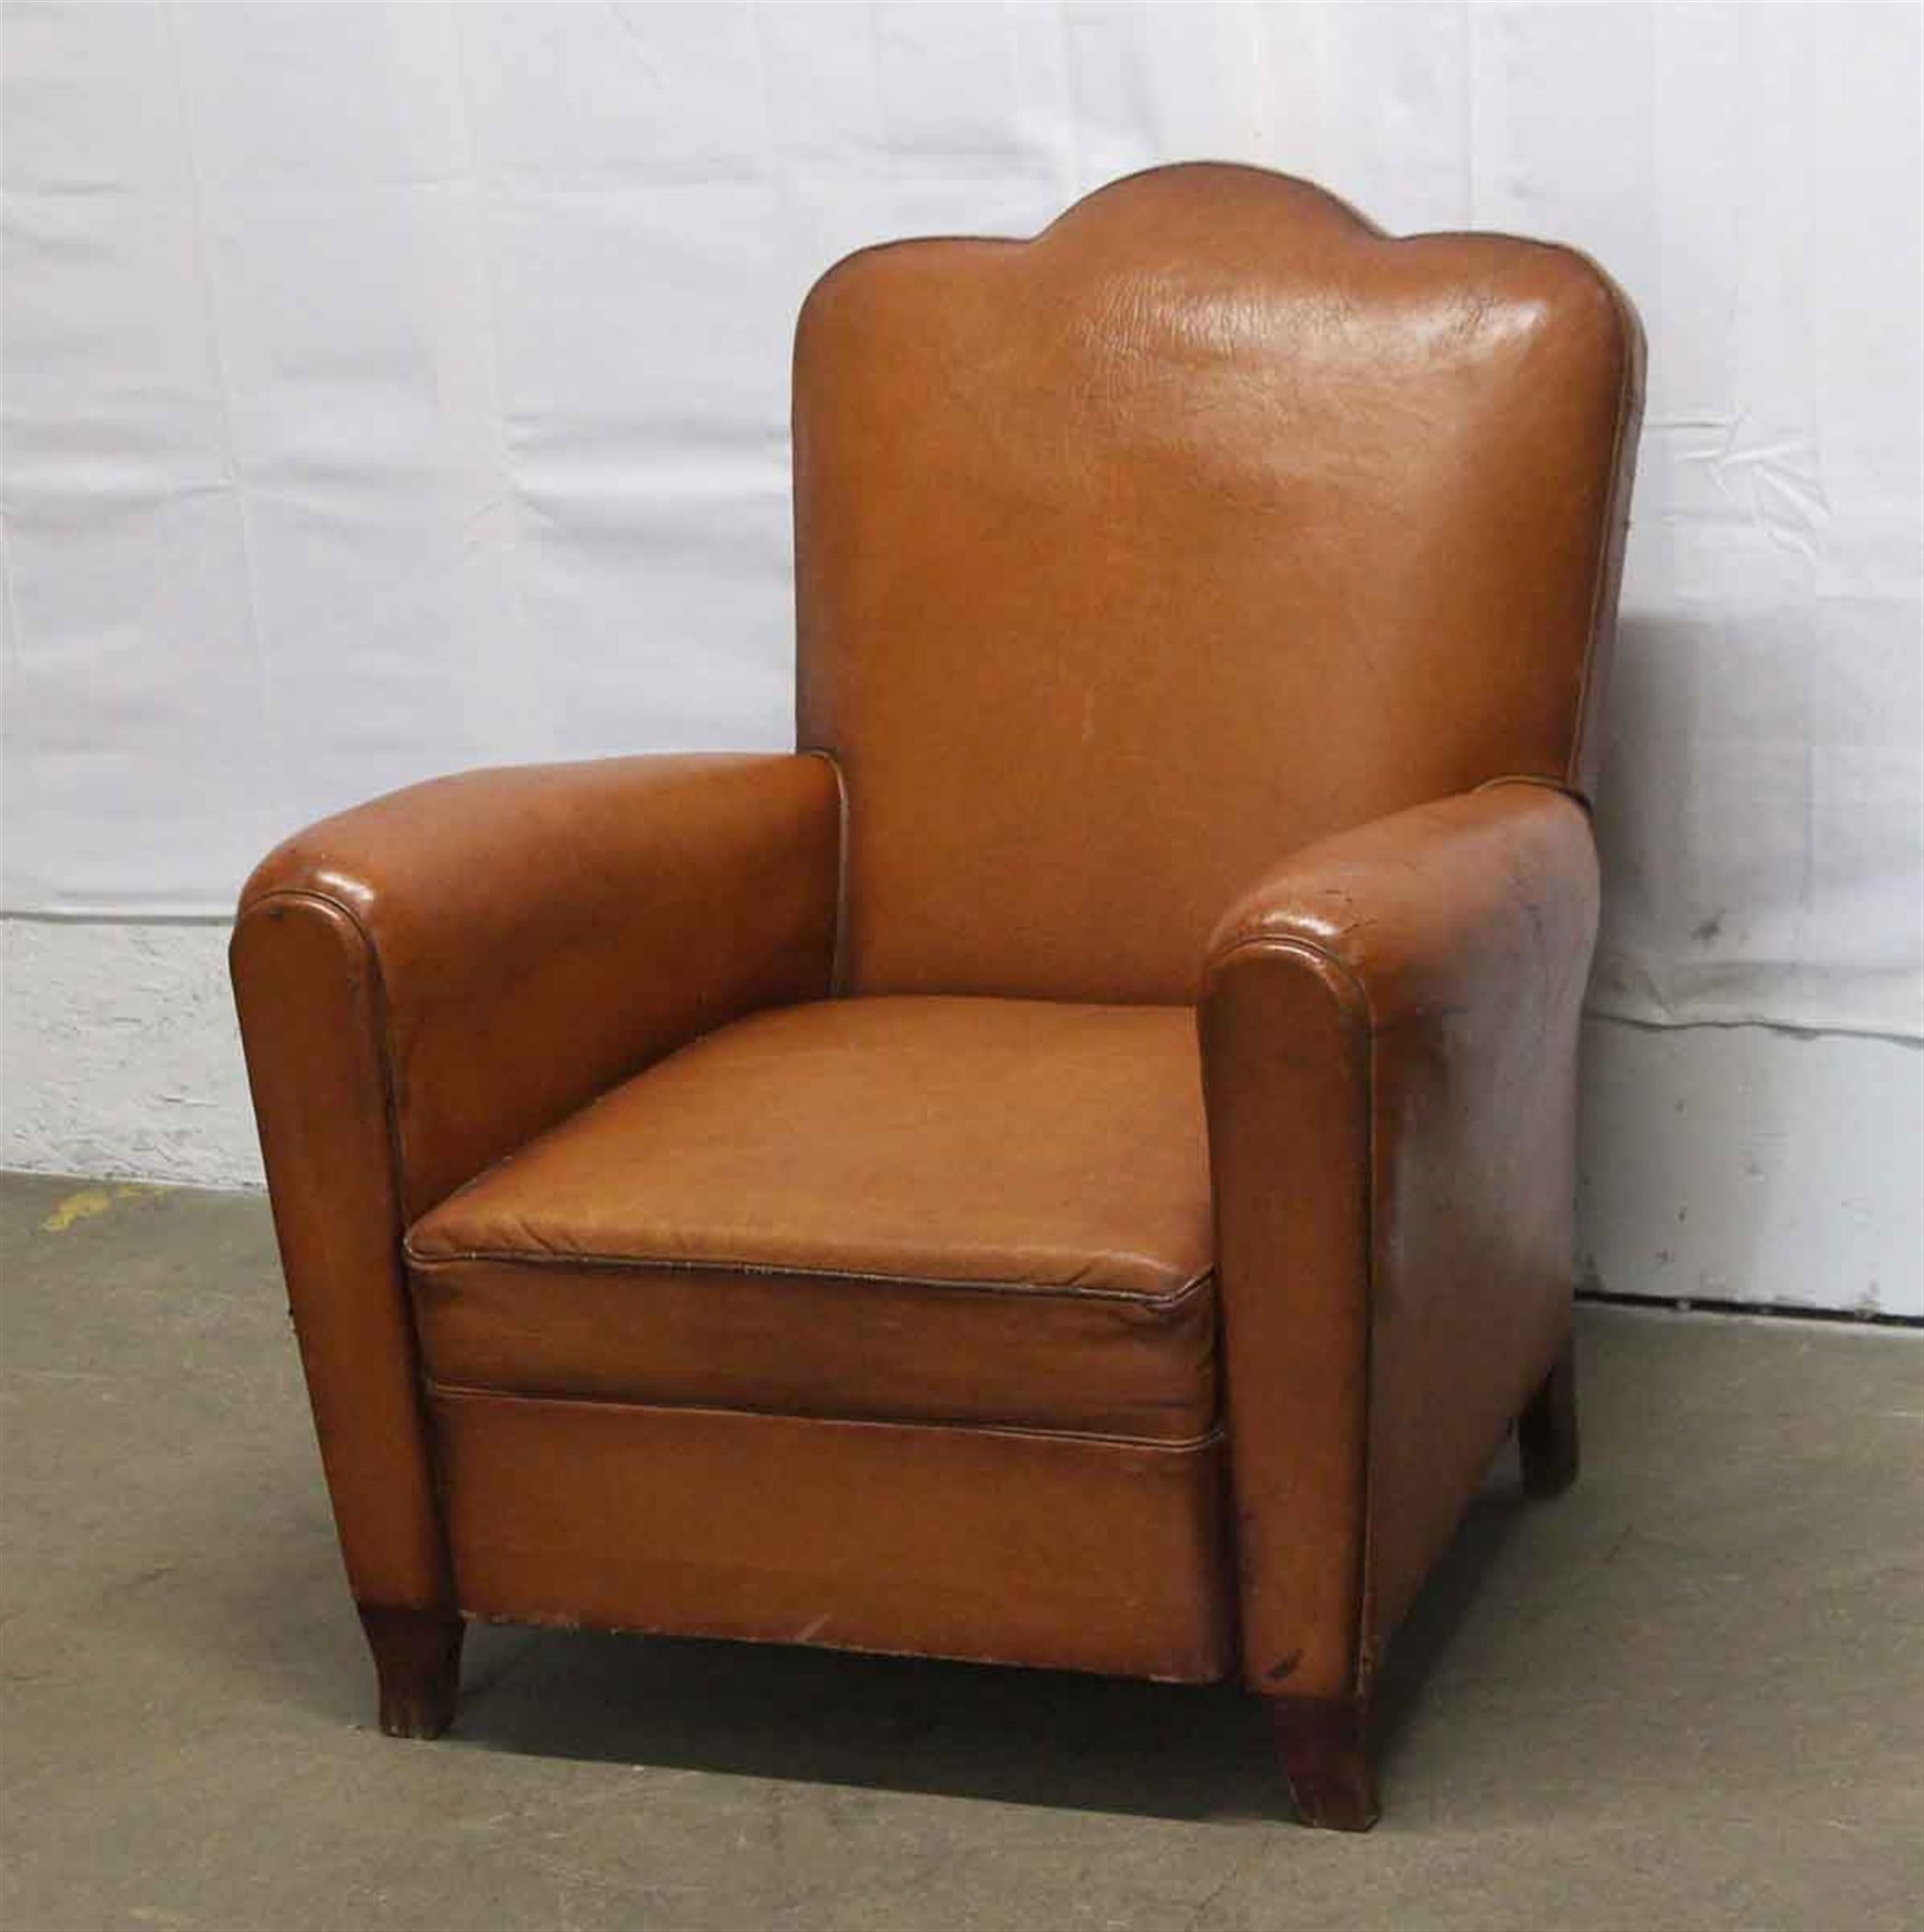 Brown leather 1960s French club chair with wooden feet and a studded back. This can be viewed at one of our New York City locations. Please inquire for the exact address.